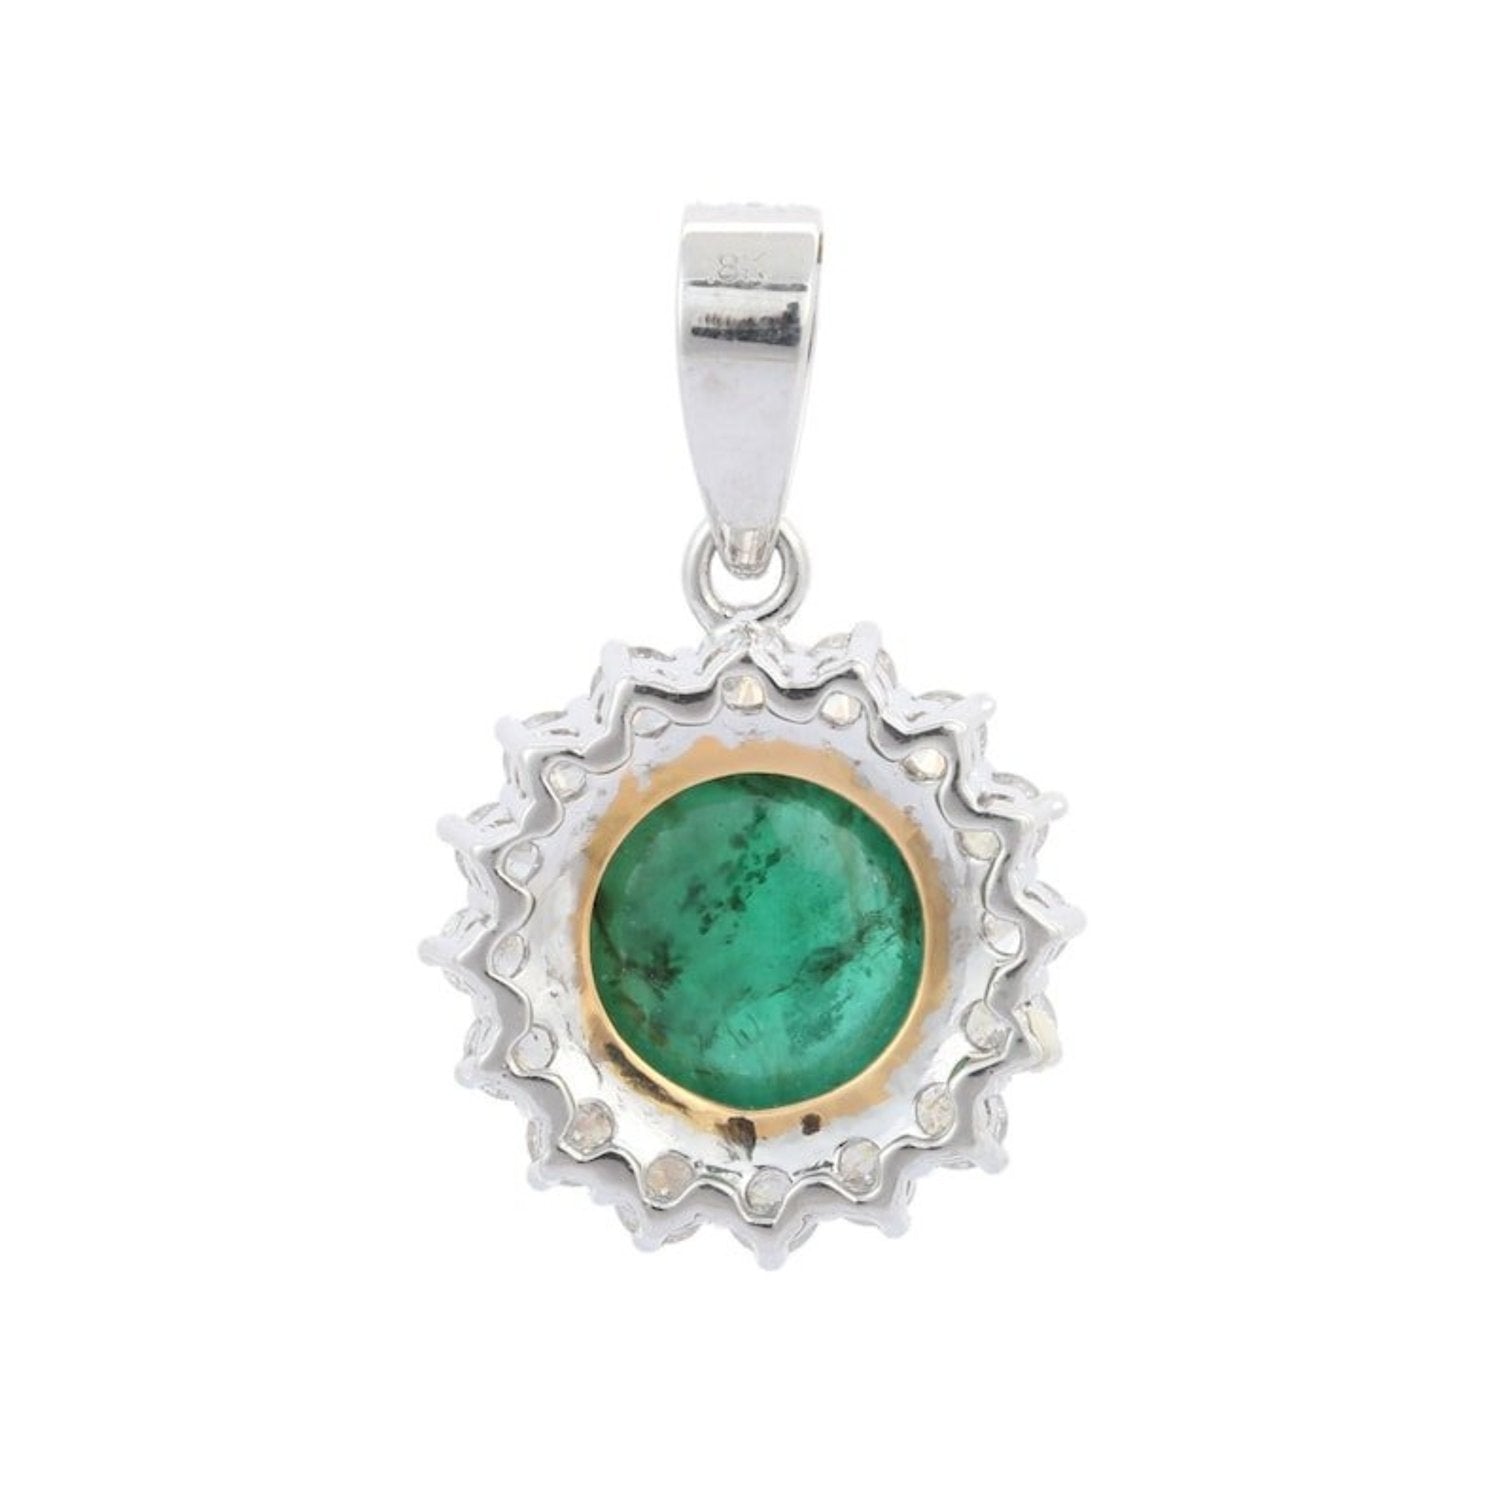 18K White Gold and Emerald Pendant - VR Jewels